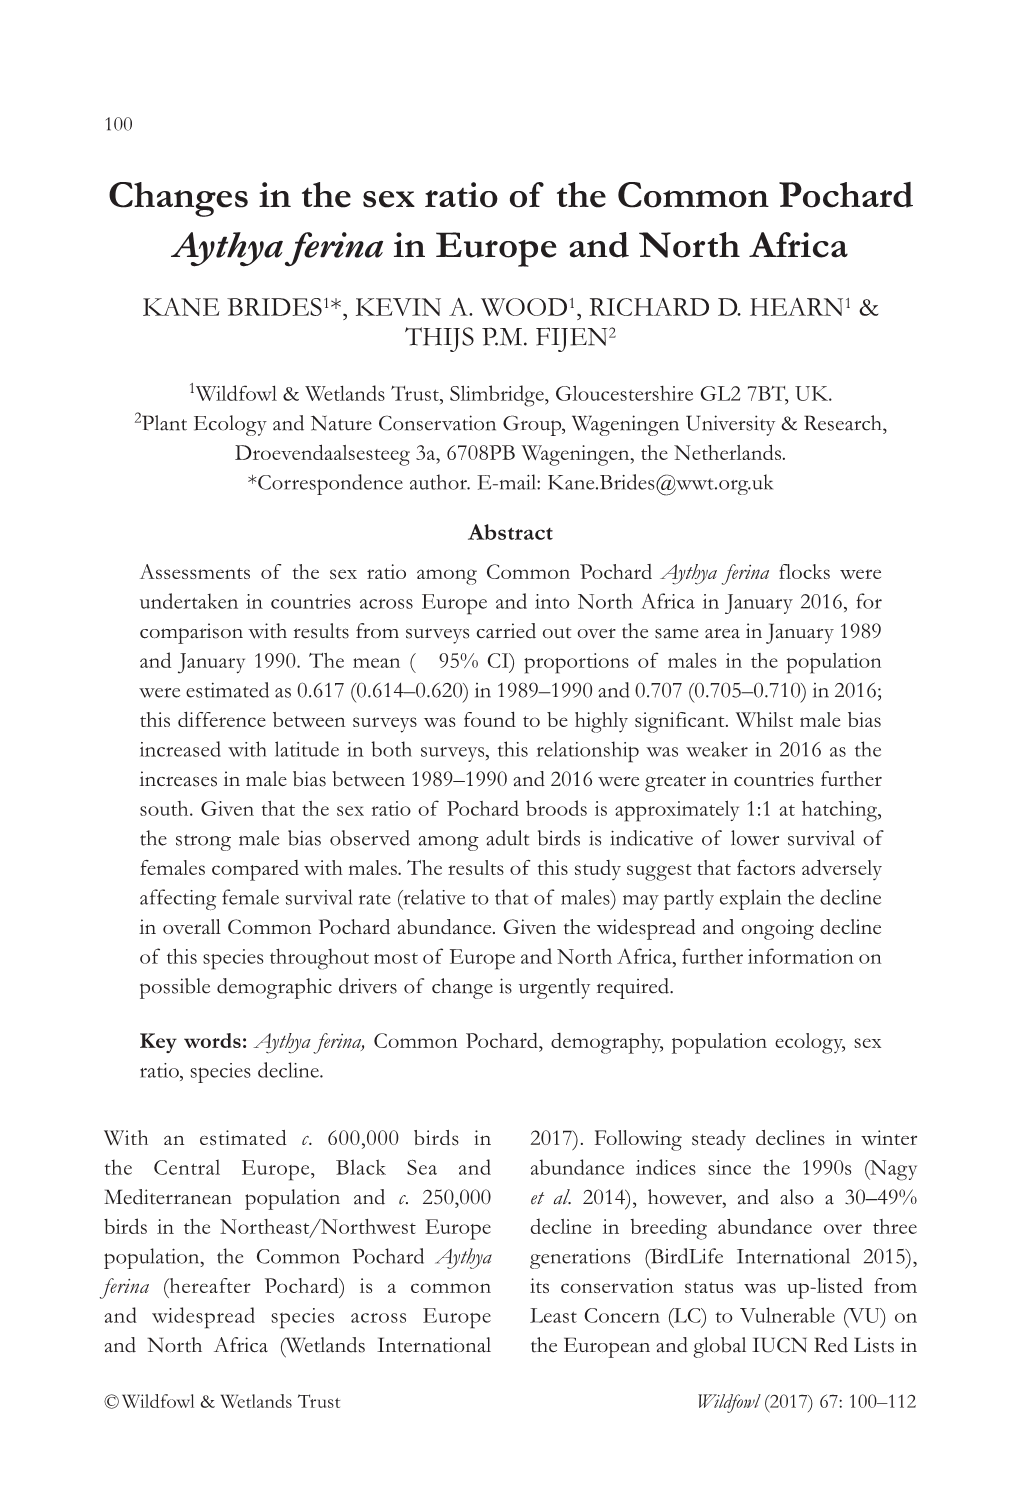 Changes in the Sex Ratio of the Common Pochard Aythya Ferina in Europe and North Africa